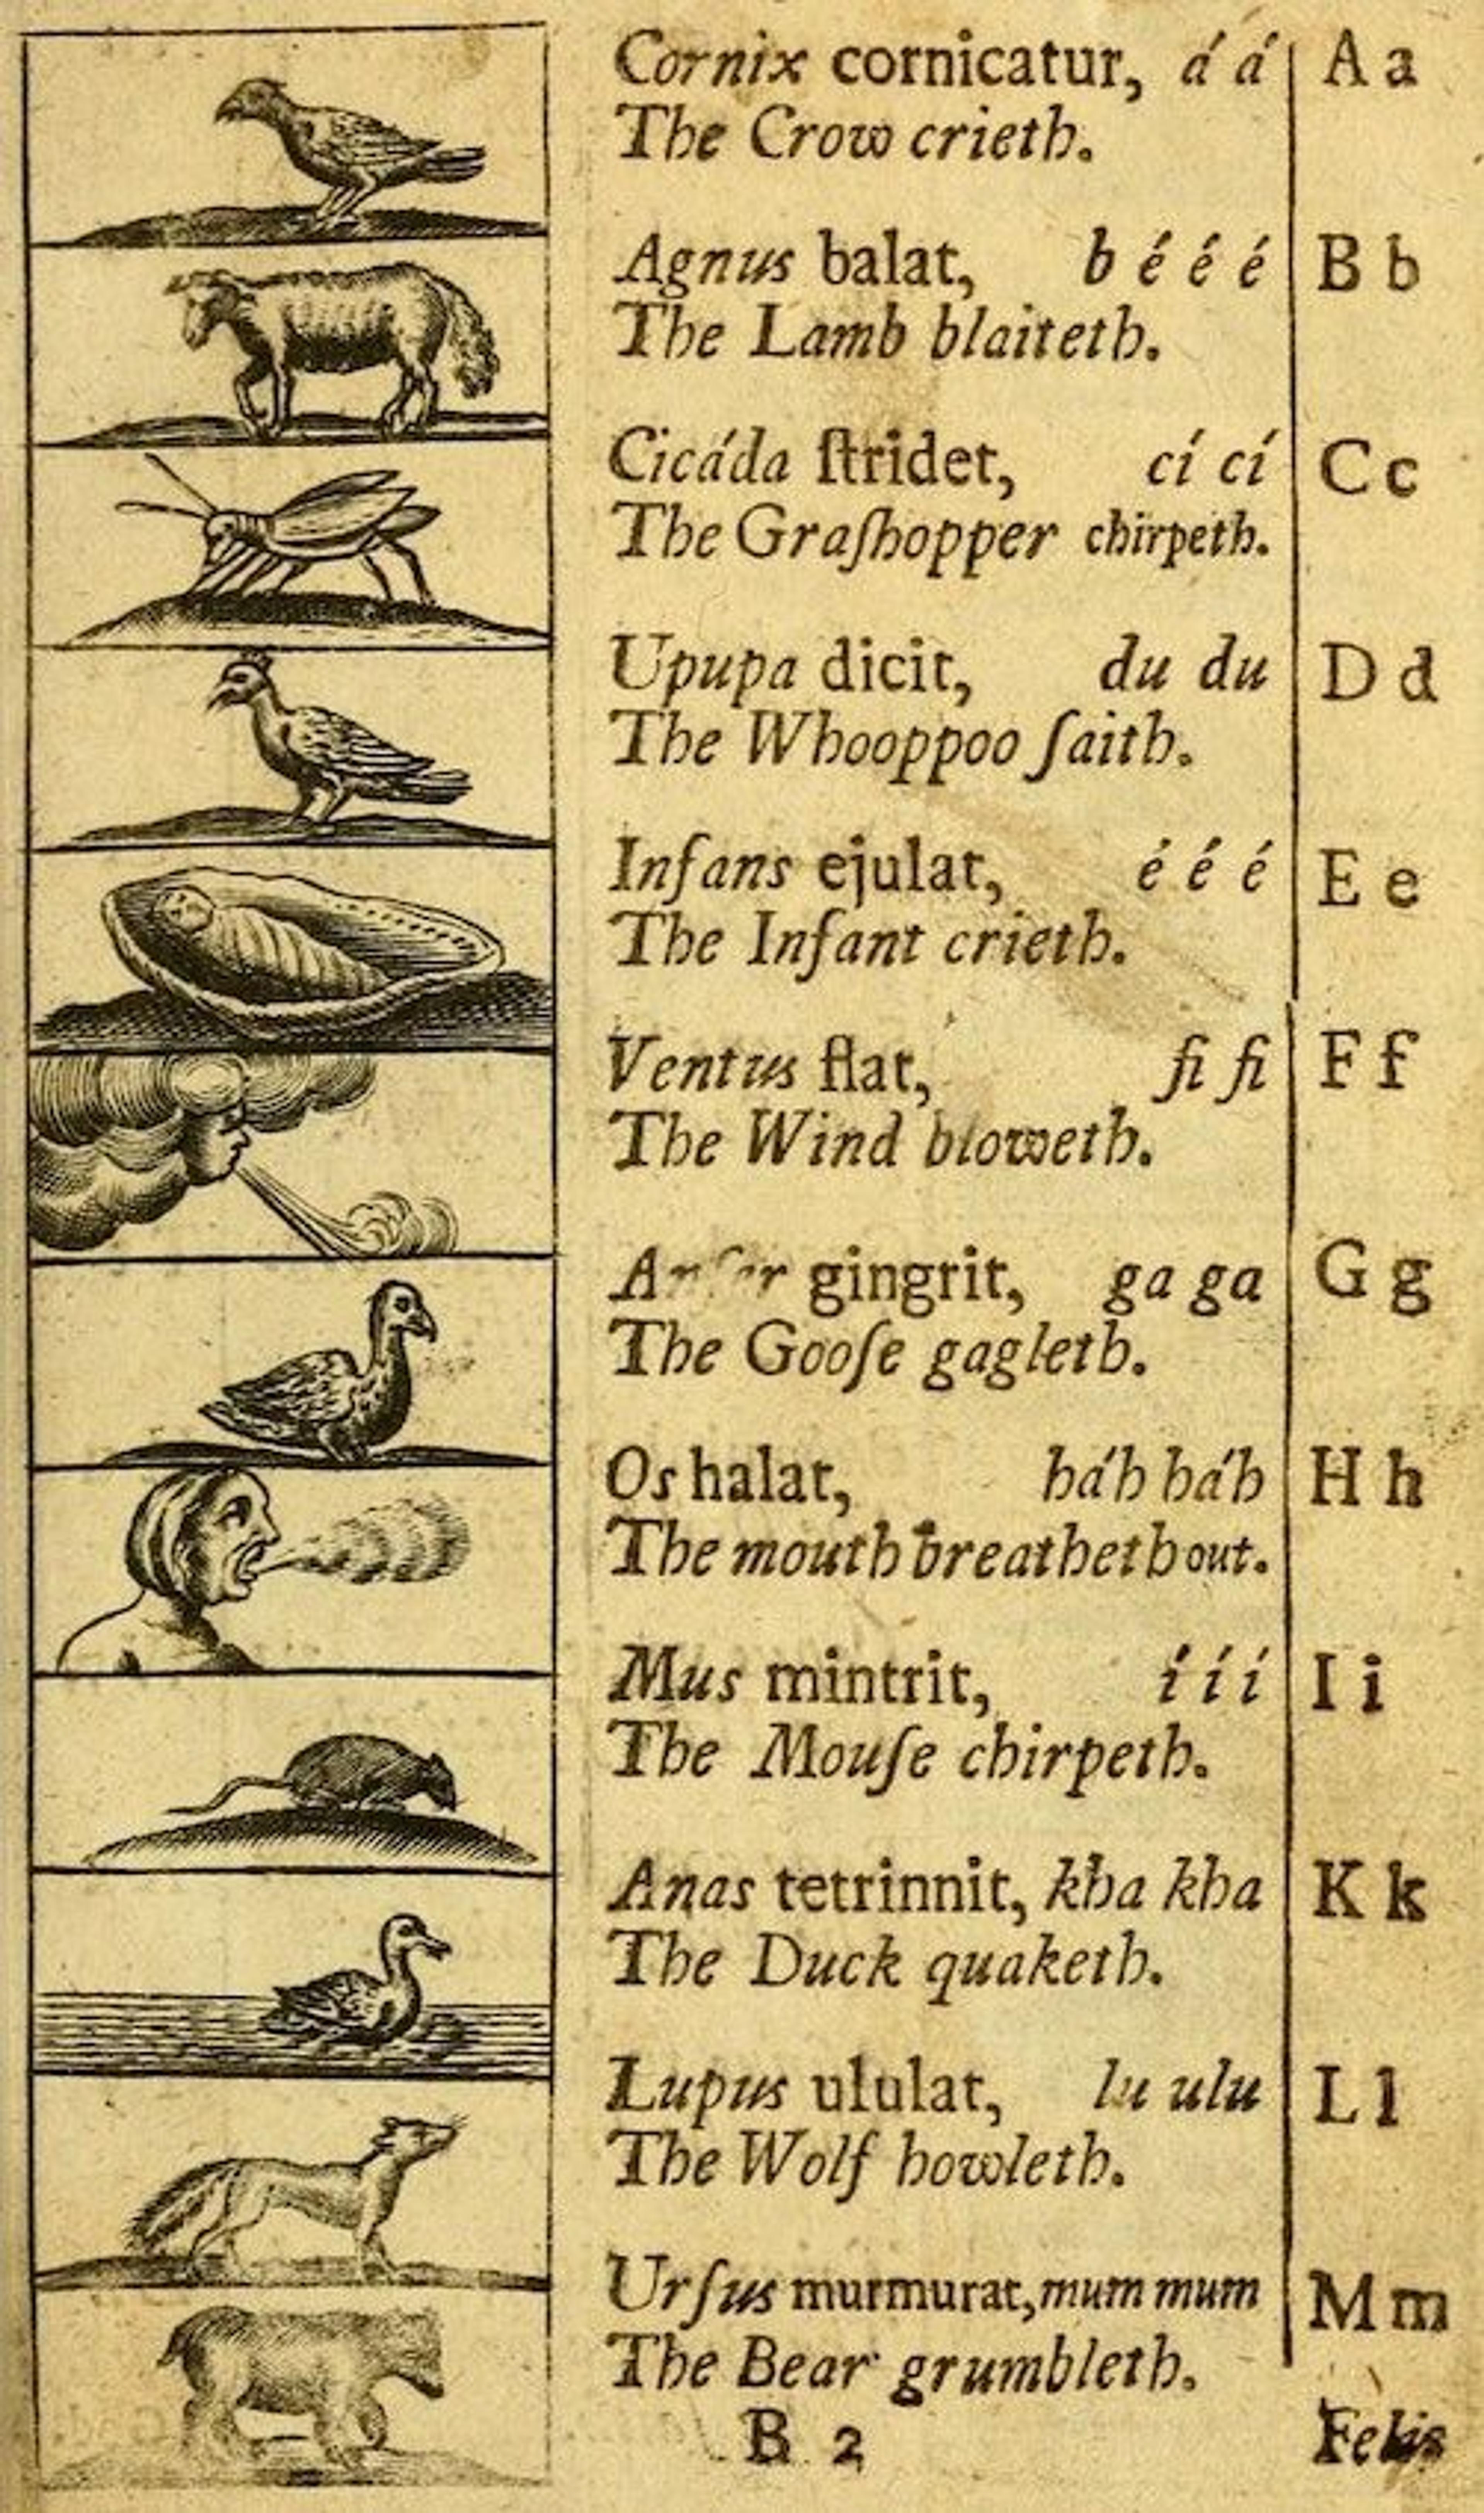 A yellowed sheet with a column of printed illustrations of animals and people alongside a column of descriptions showing the key letters and sounds, including an image of a crow with the words 'The Crow crieth'